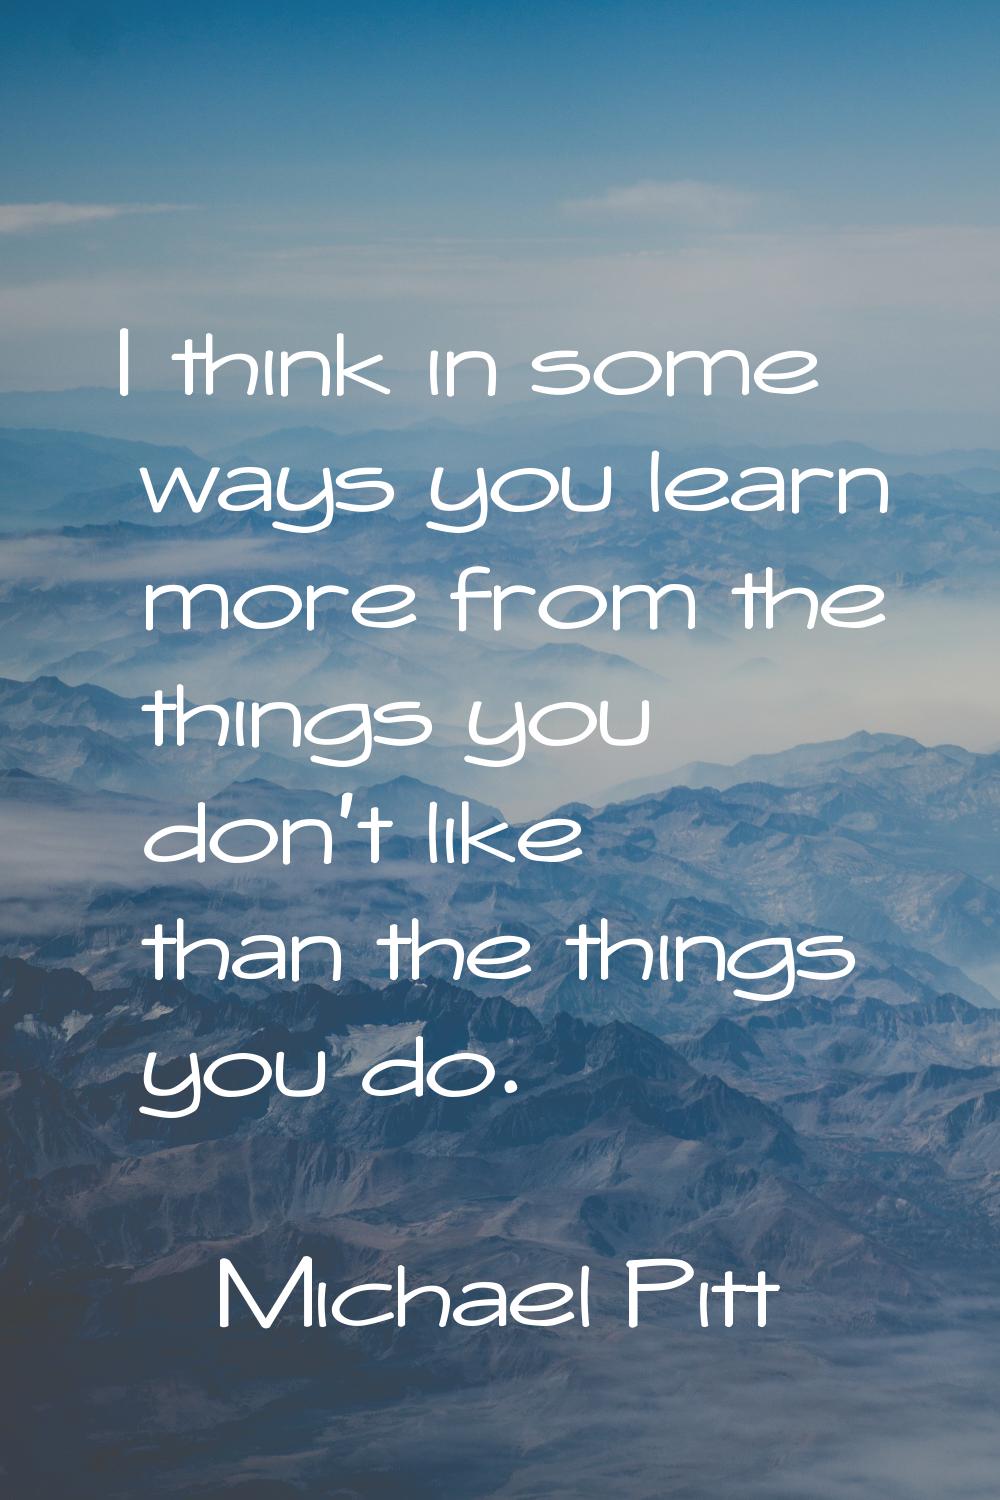 I think in some ways you learn more from the things you don't like than the things you do.